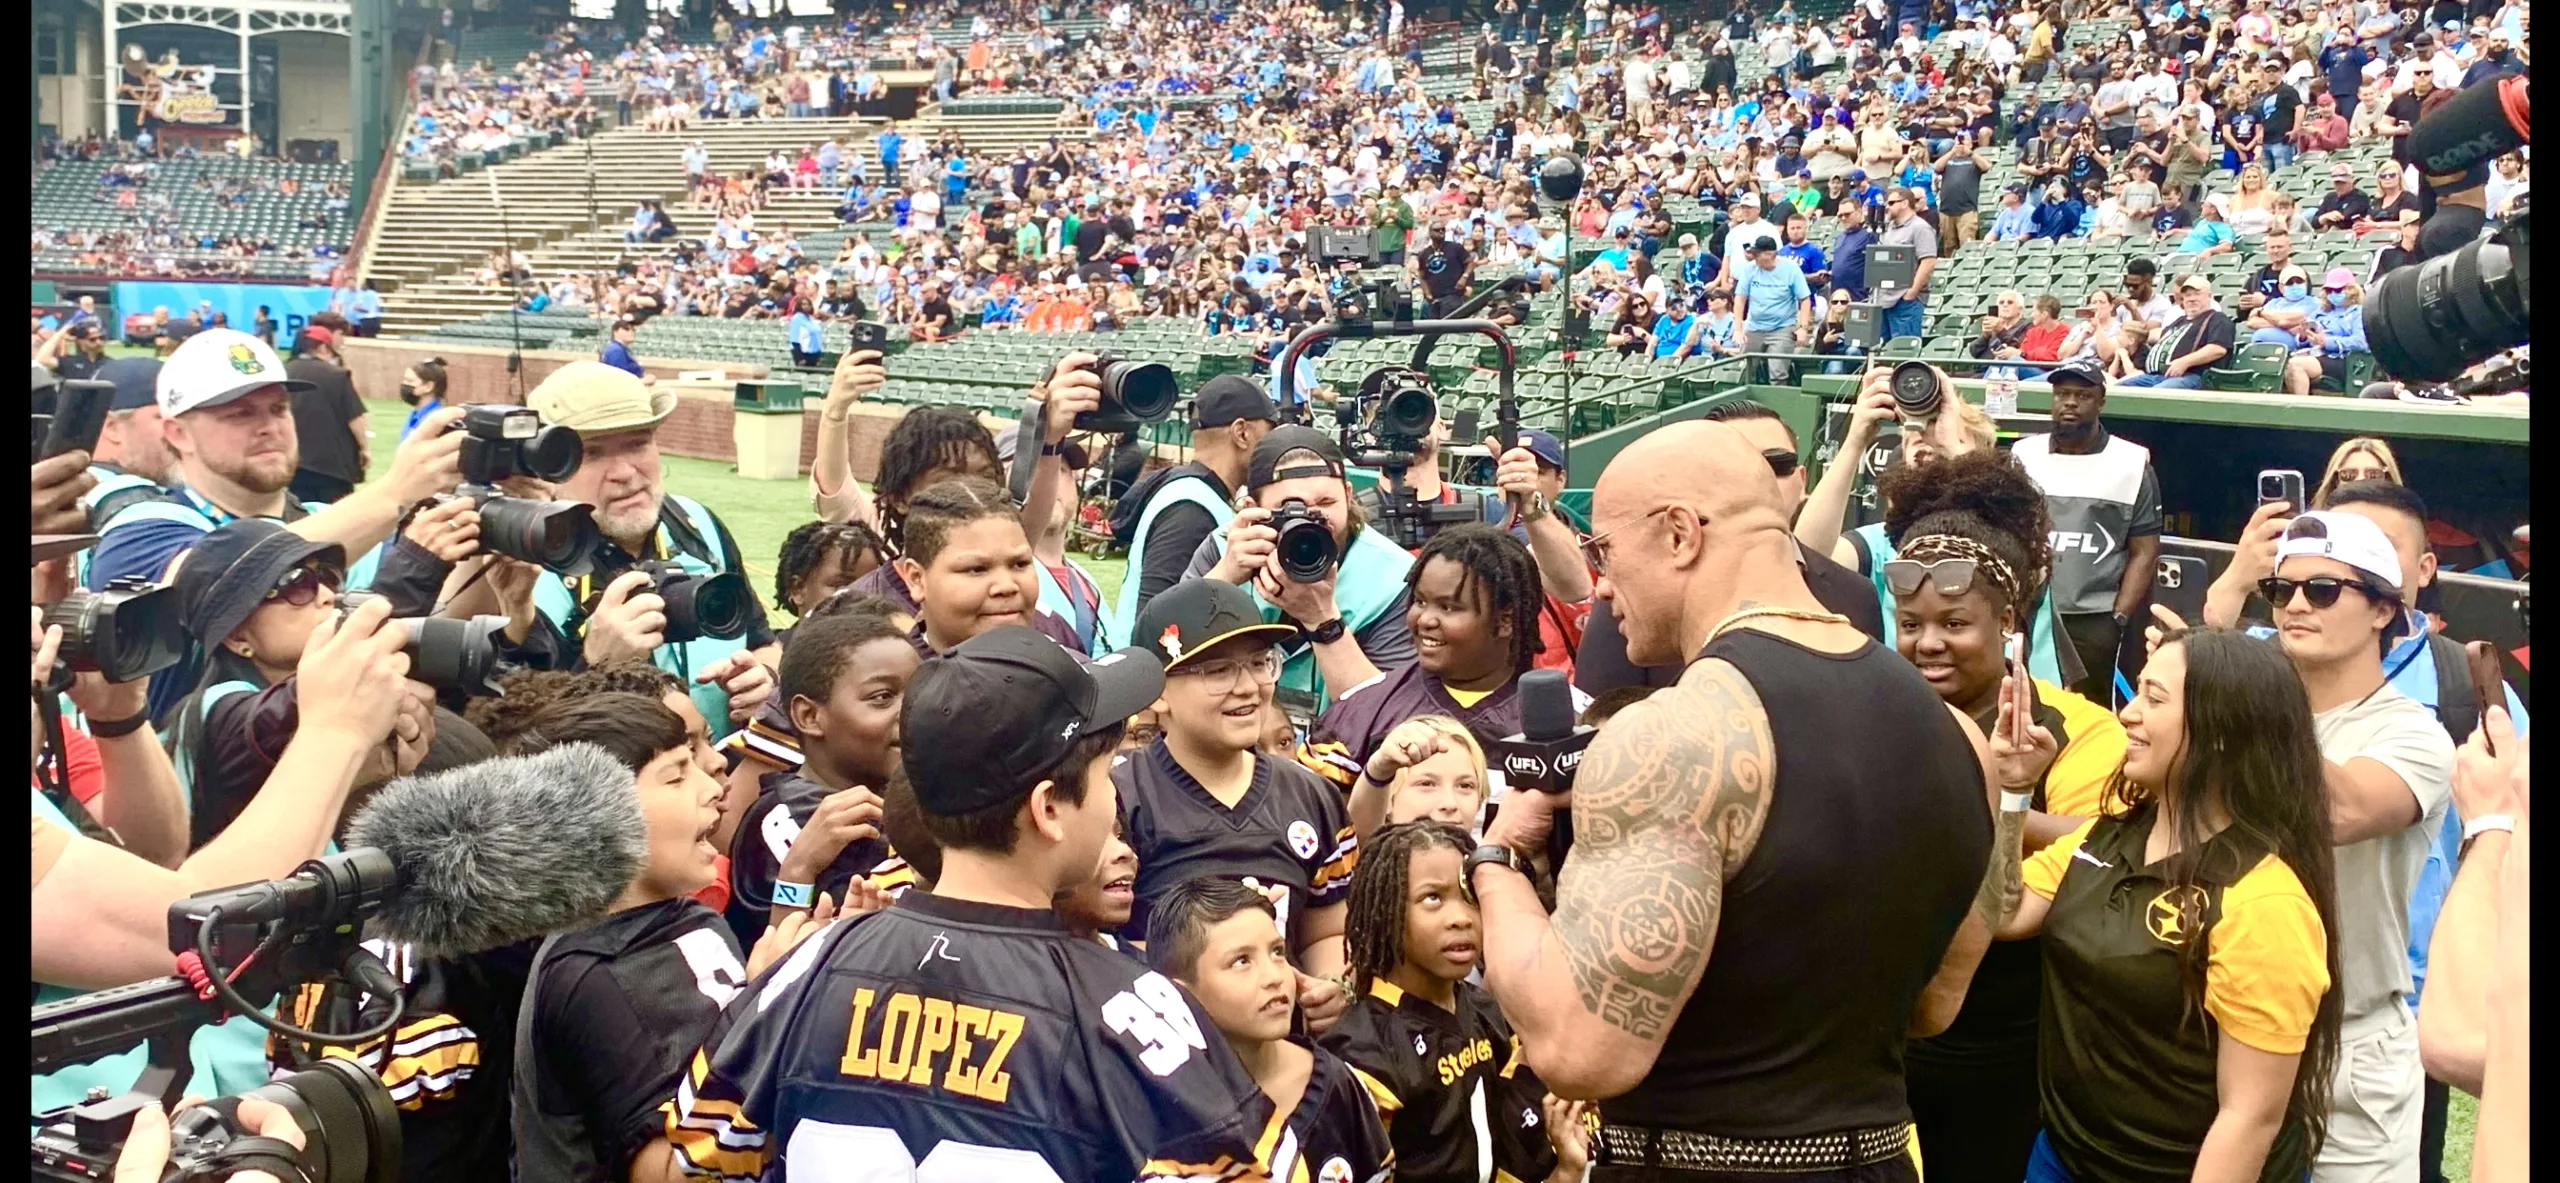 Dwayne "The Rock" Johnson talks to an Arlington-area football team prior to kickoff of the Arlington Renegades-Birmingham Stallions game at Choctaw Stadium, the first-ever game under the UFL banner. (Photo by MITCH LUCAS)